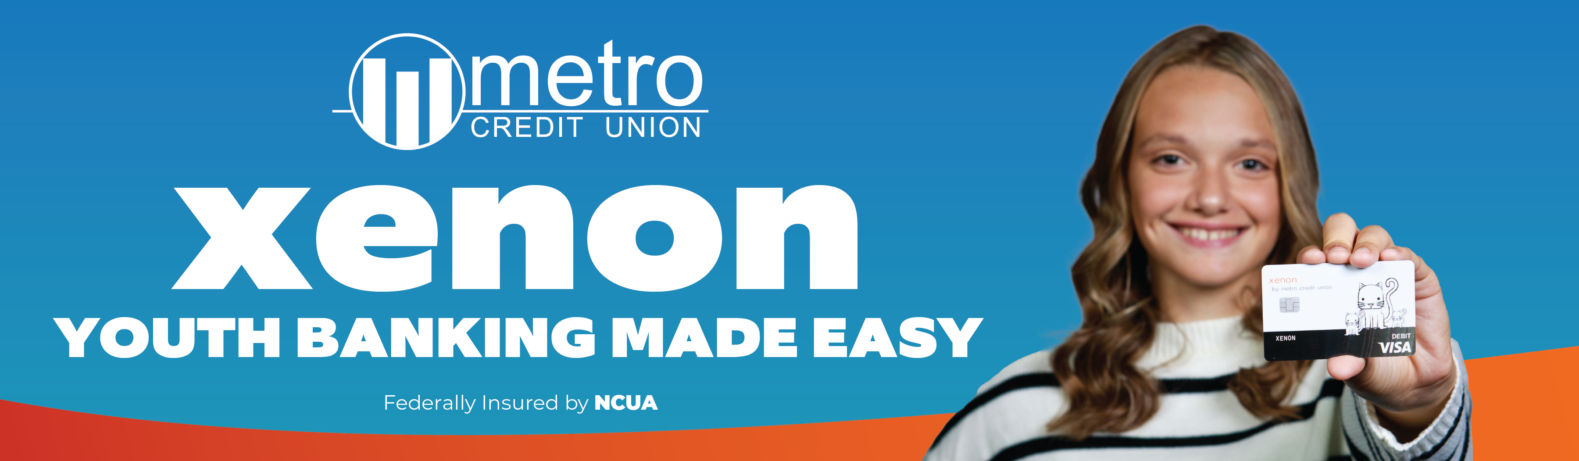 Teaching your child how to manage money is a smart thing to do & Metro Credit Union helps by offering youth banking accounts.